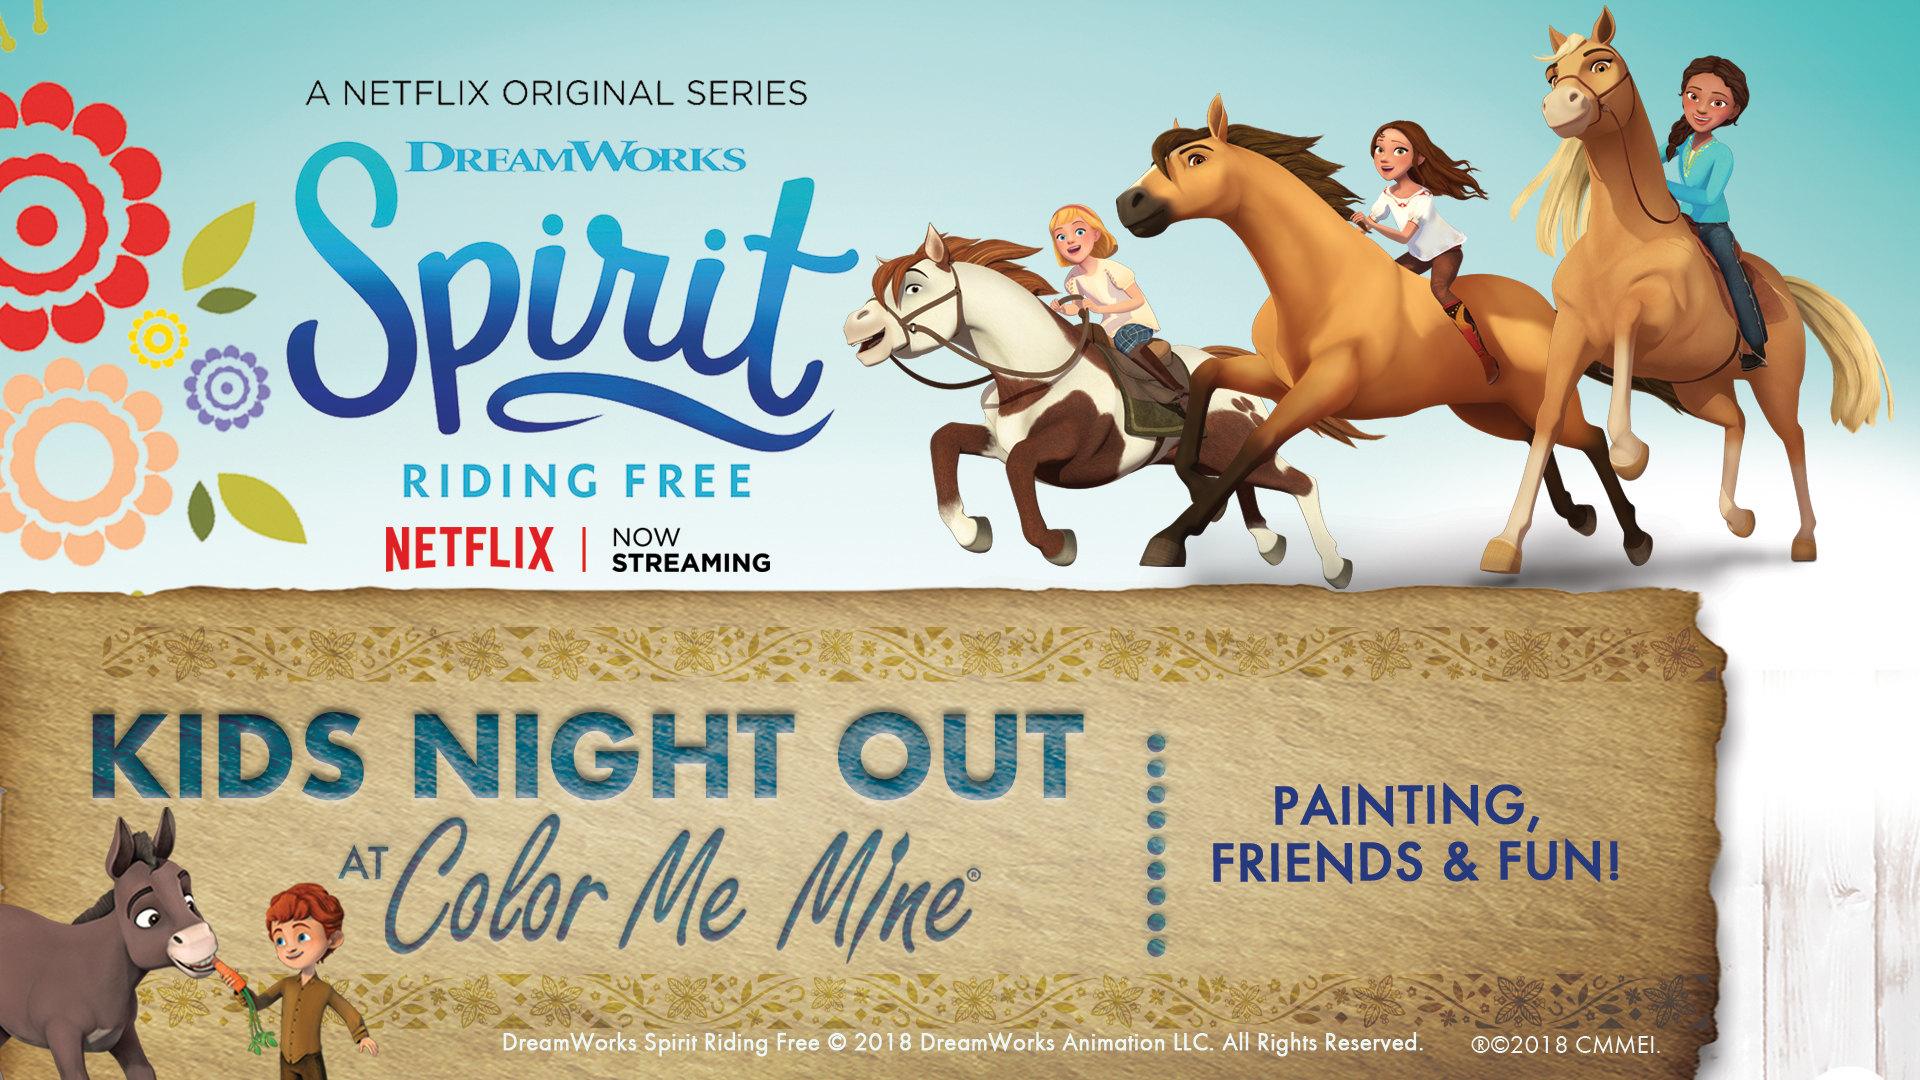 SPIRIT RIDING FREE Night Out -August 10th in Crystal Lake, IL